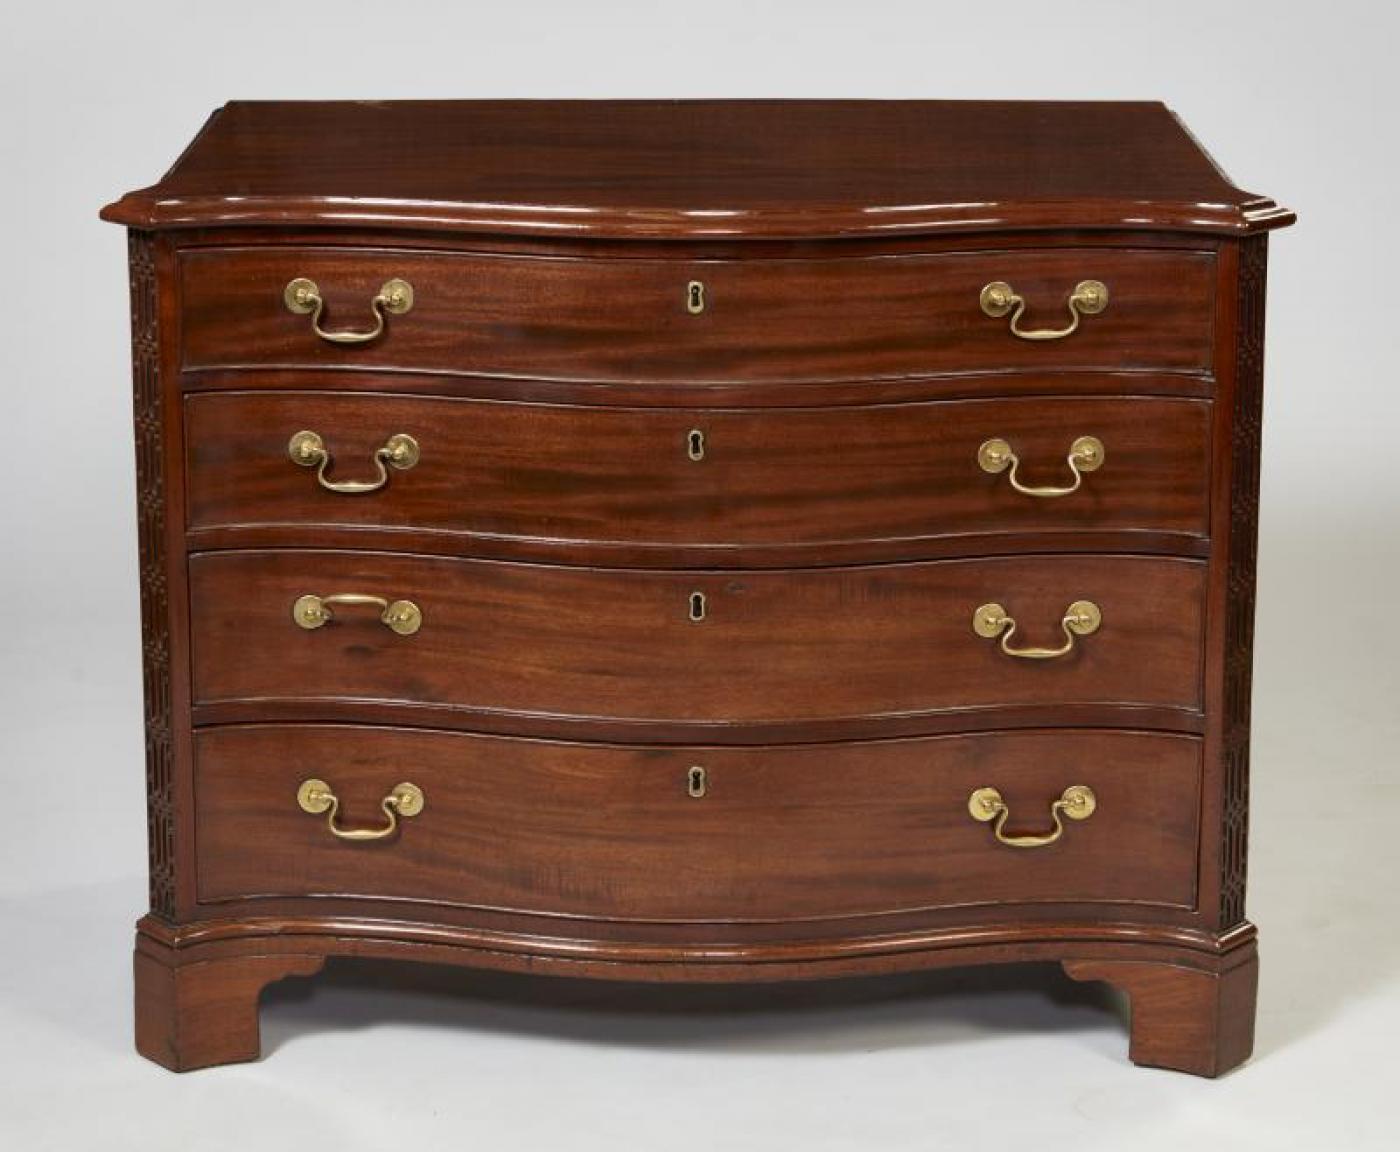 Very fine George III mahogany serpentine fronted chest of drawers, the shaped top with heavily molded edge over graduated drawers, the top one fitted with writing slide, tray and four lidded compartments, all with original swan neck handles, flanked